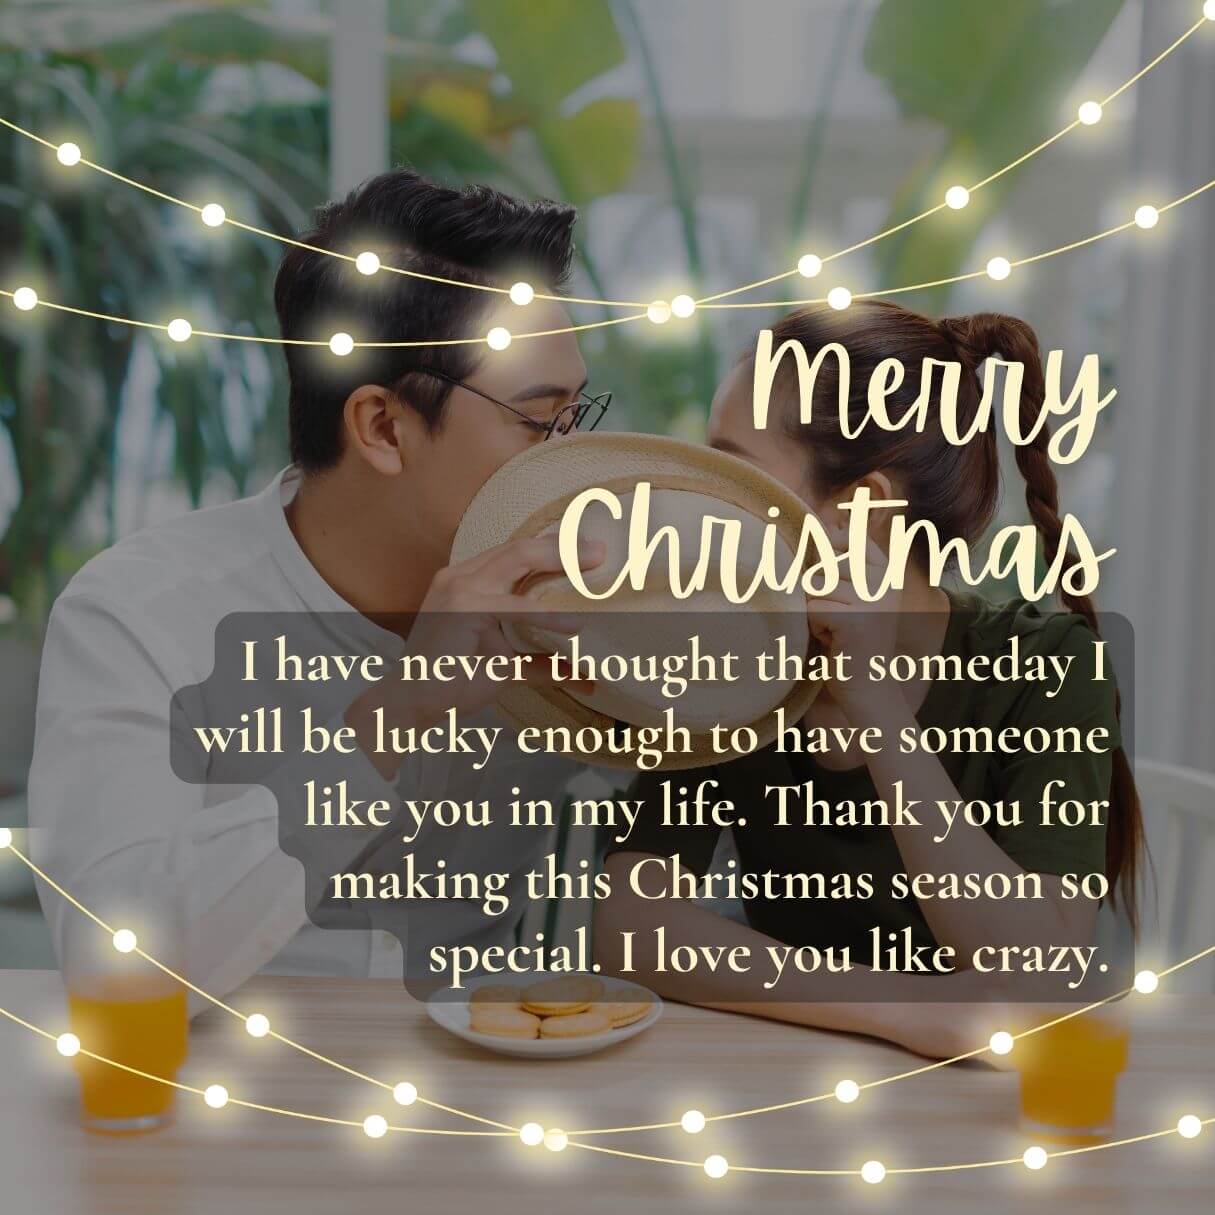 Merry Christmas Messages For Girlfriend